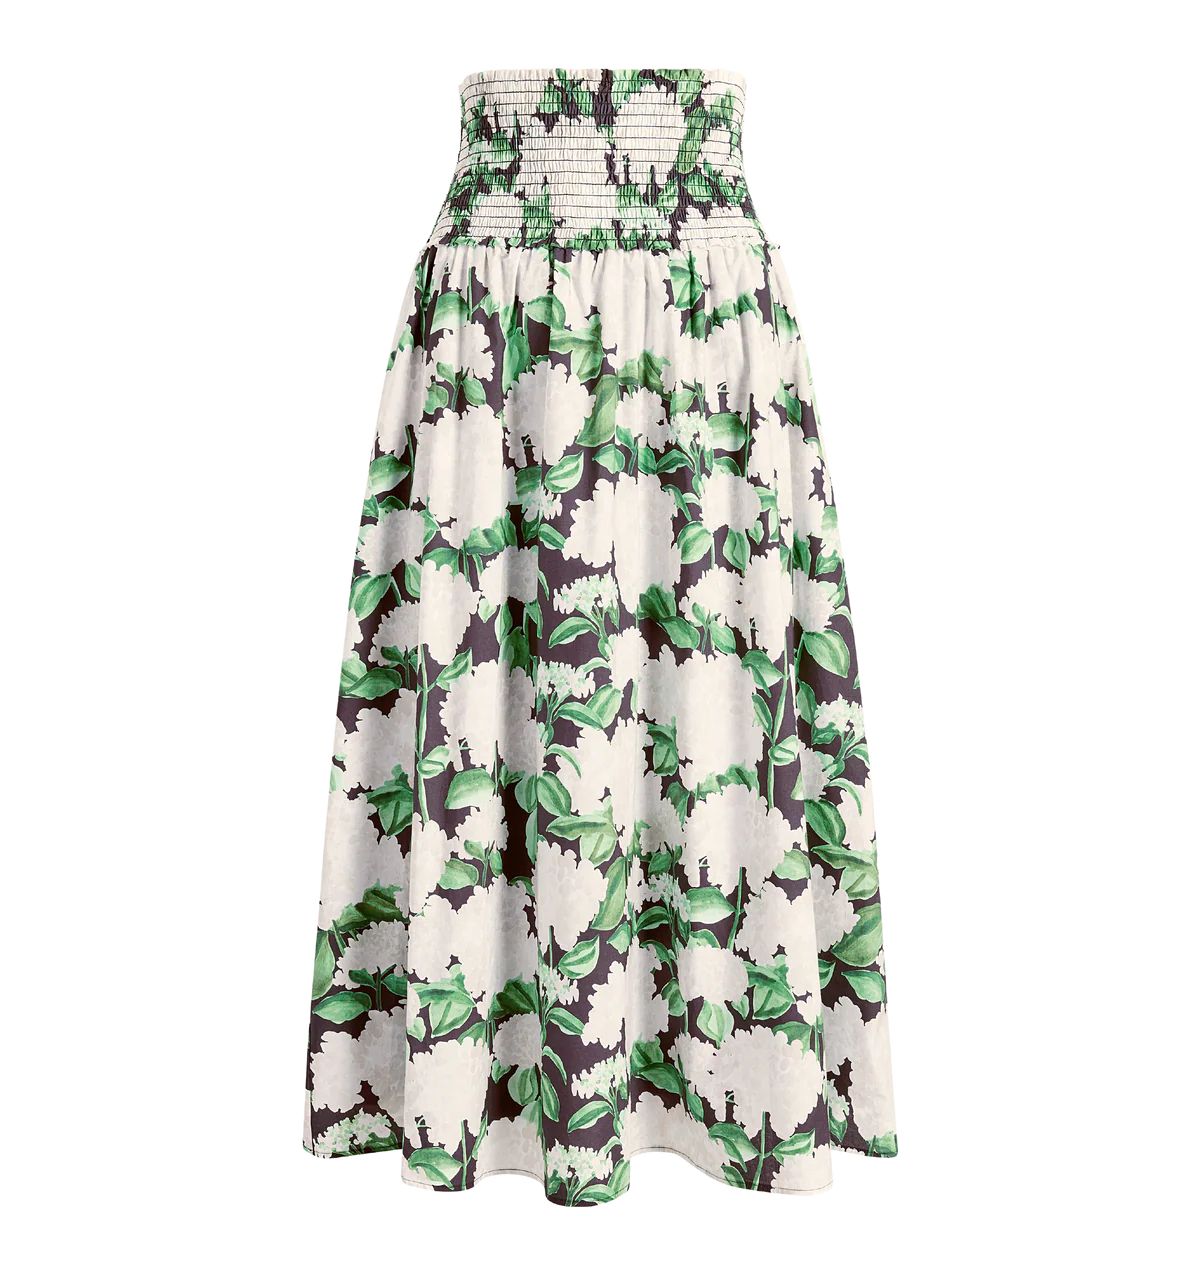 The Delphine Nap Skirt in Night Bloom Cotton | Over The Moon